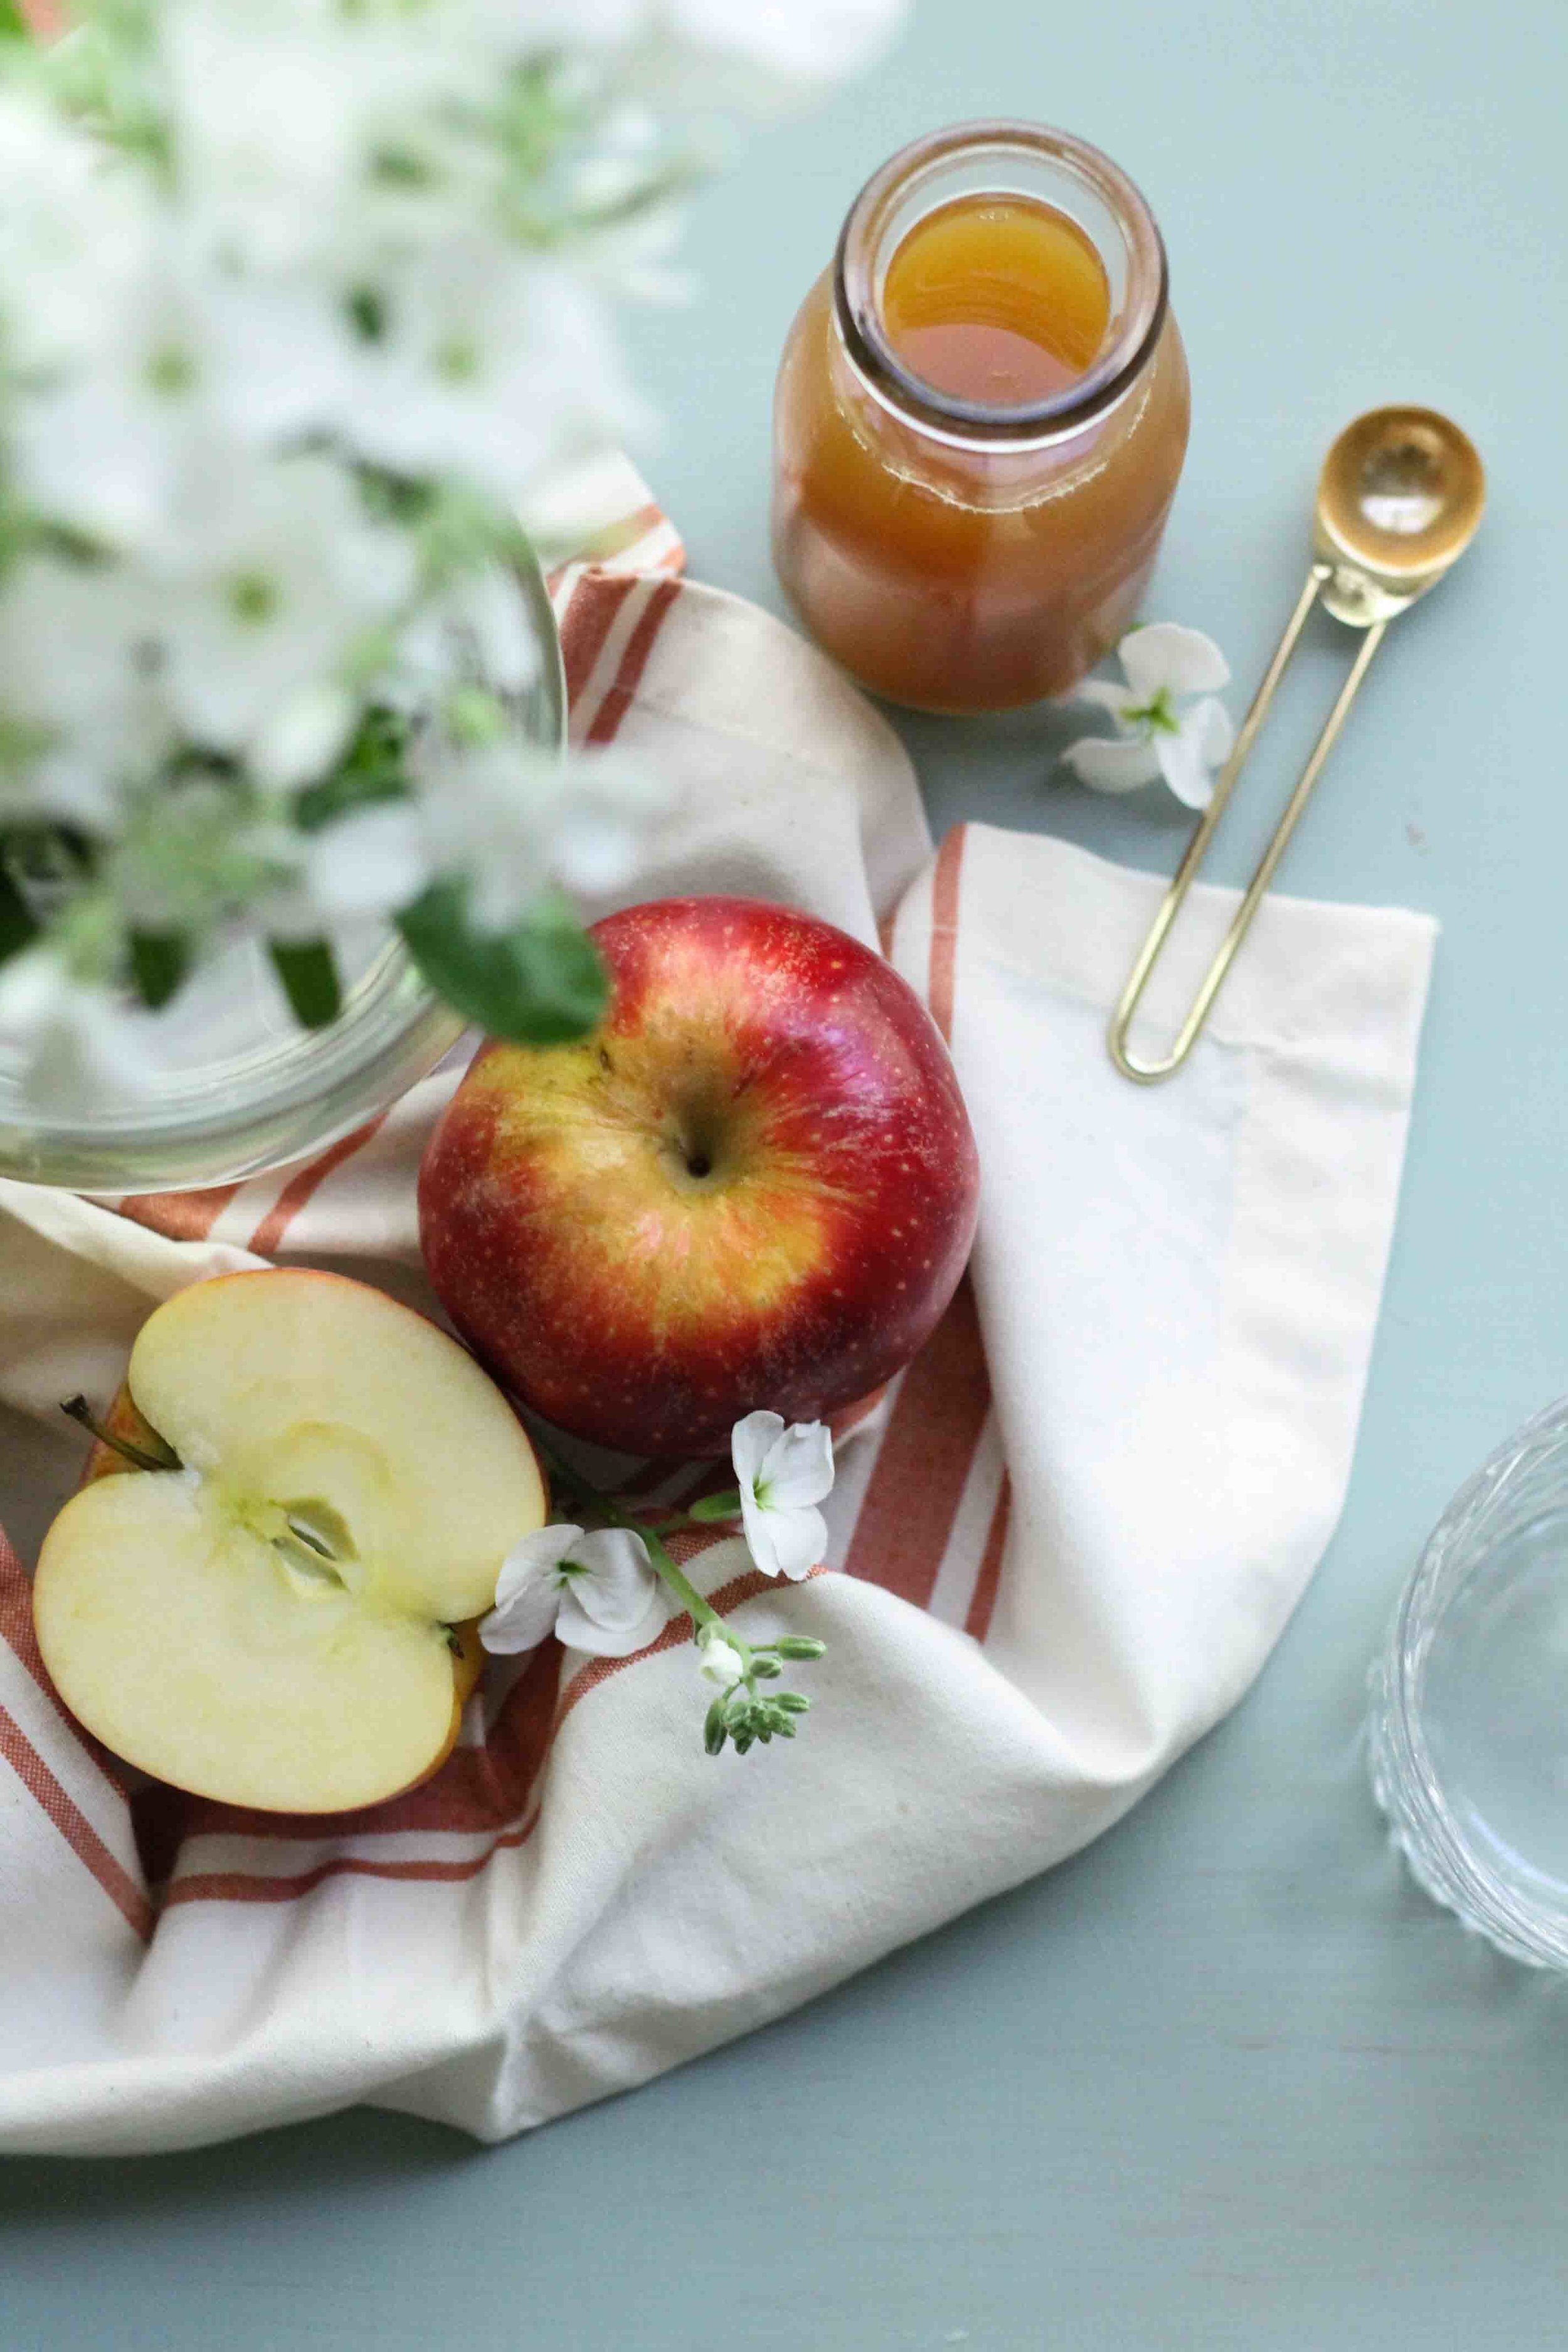 These apple cider slushies are rimmed with spiced sugar, making them the perfect, autumn mocktail! {Pedantic Foodie}